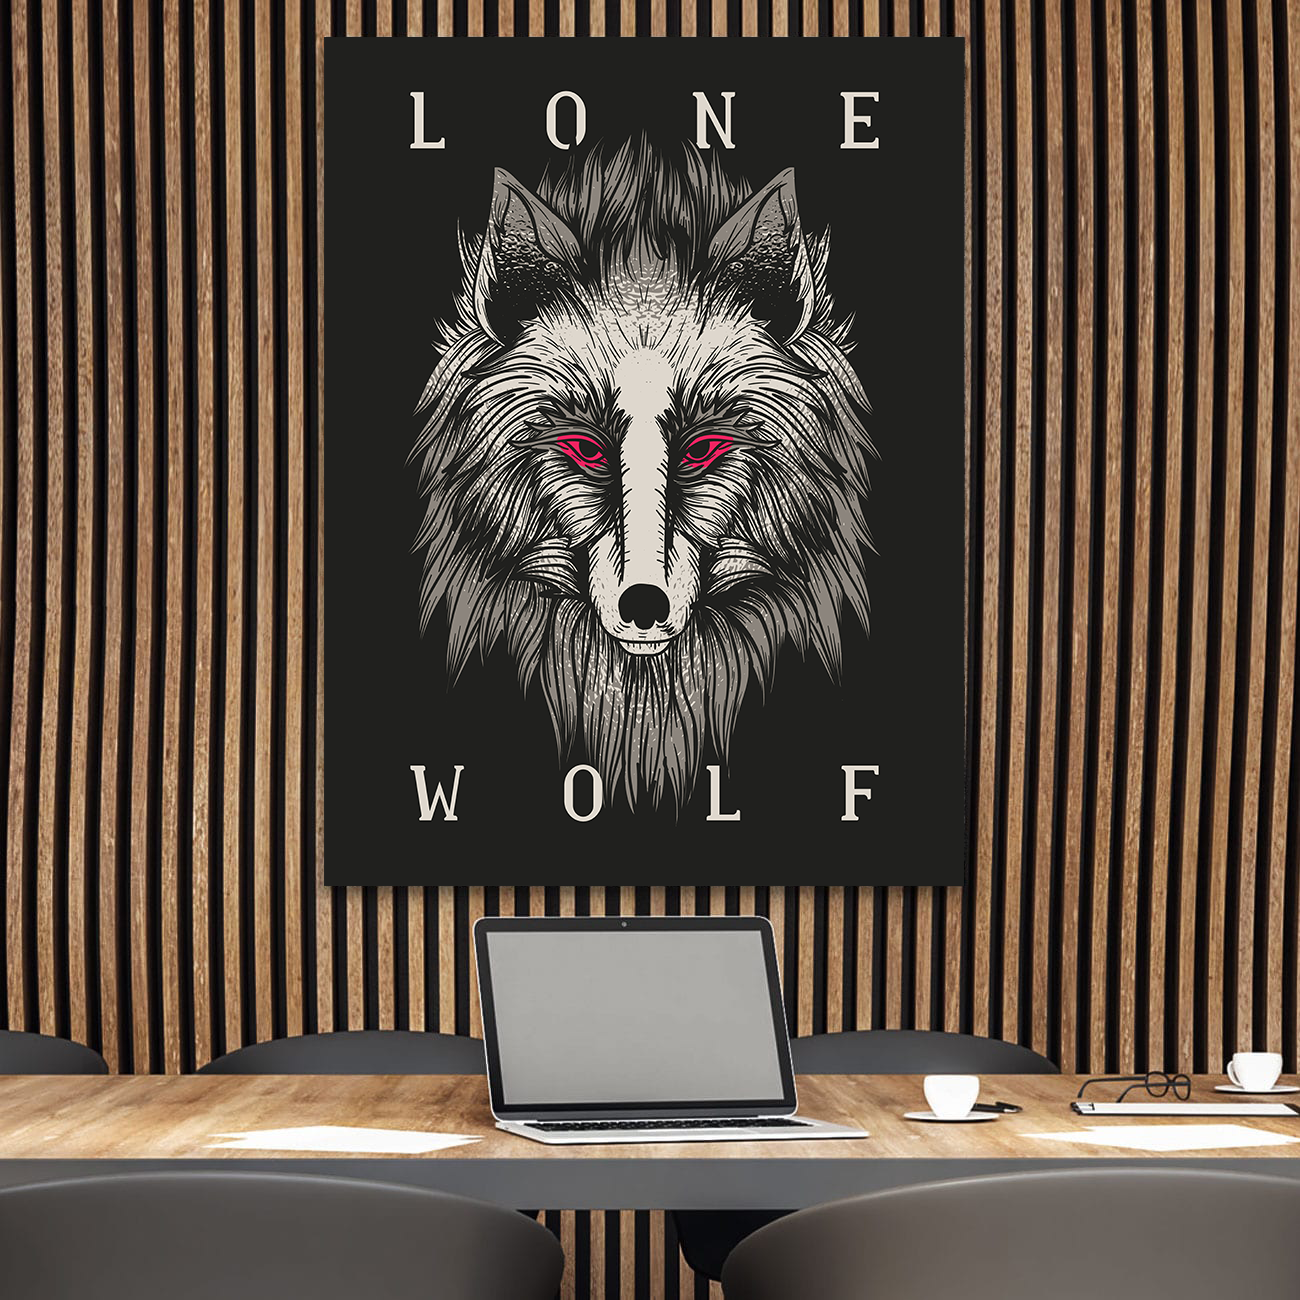 You're a Lone Wolf